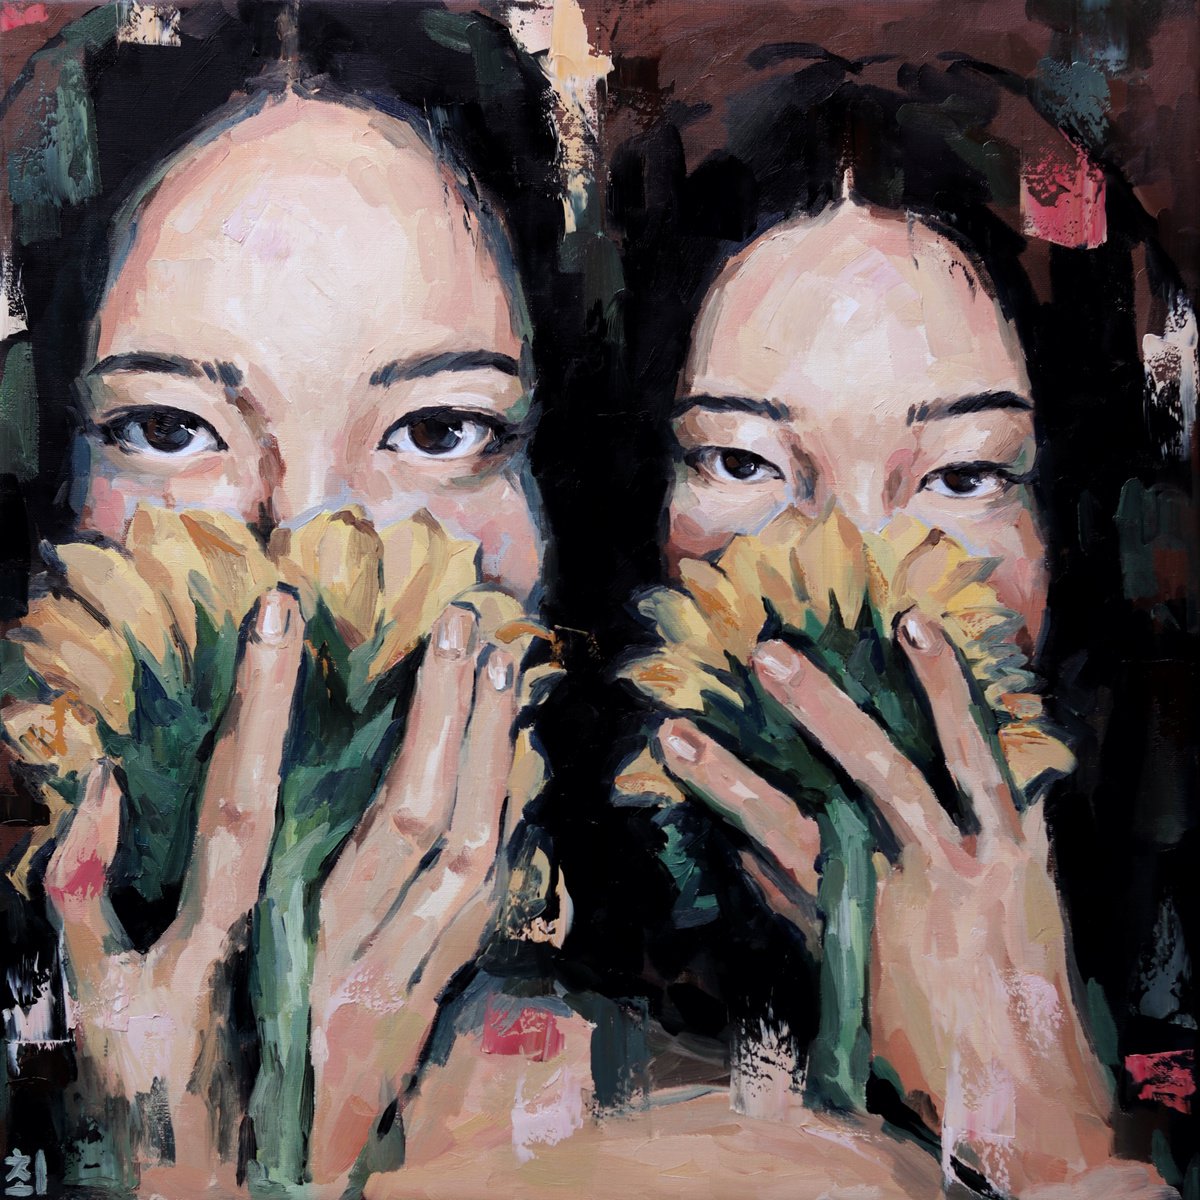 Asian women with sunflowers by Marina Ogai